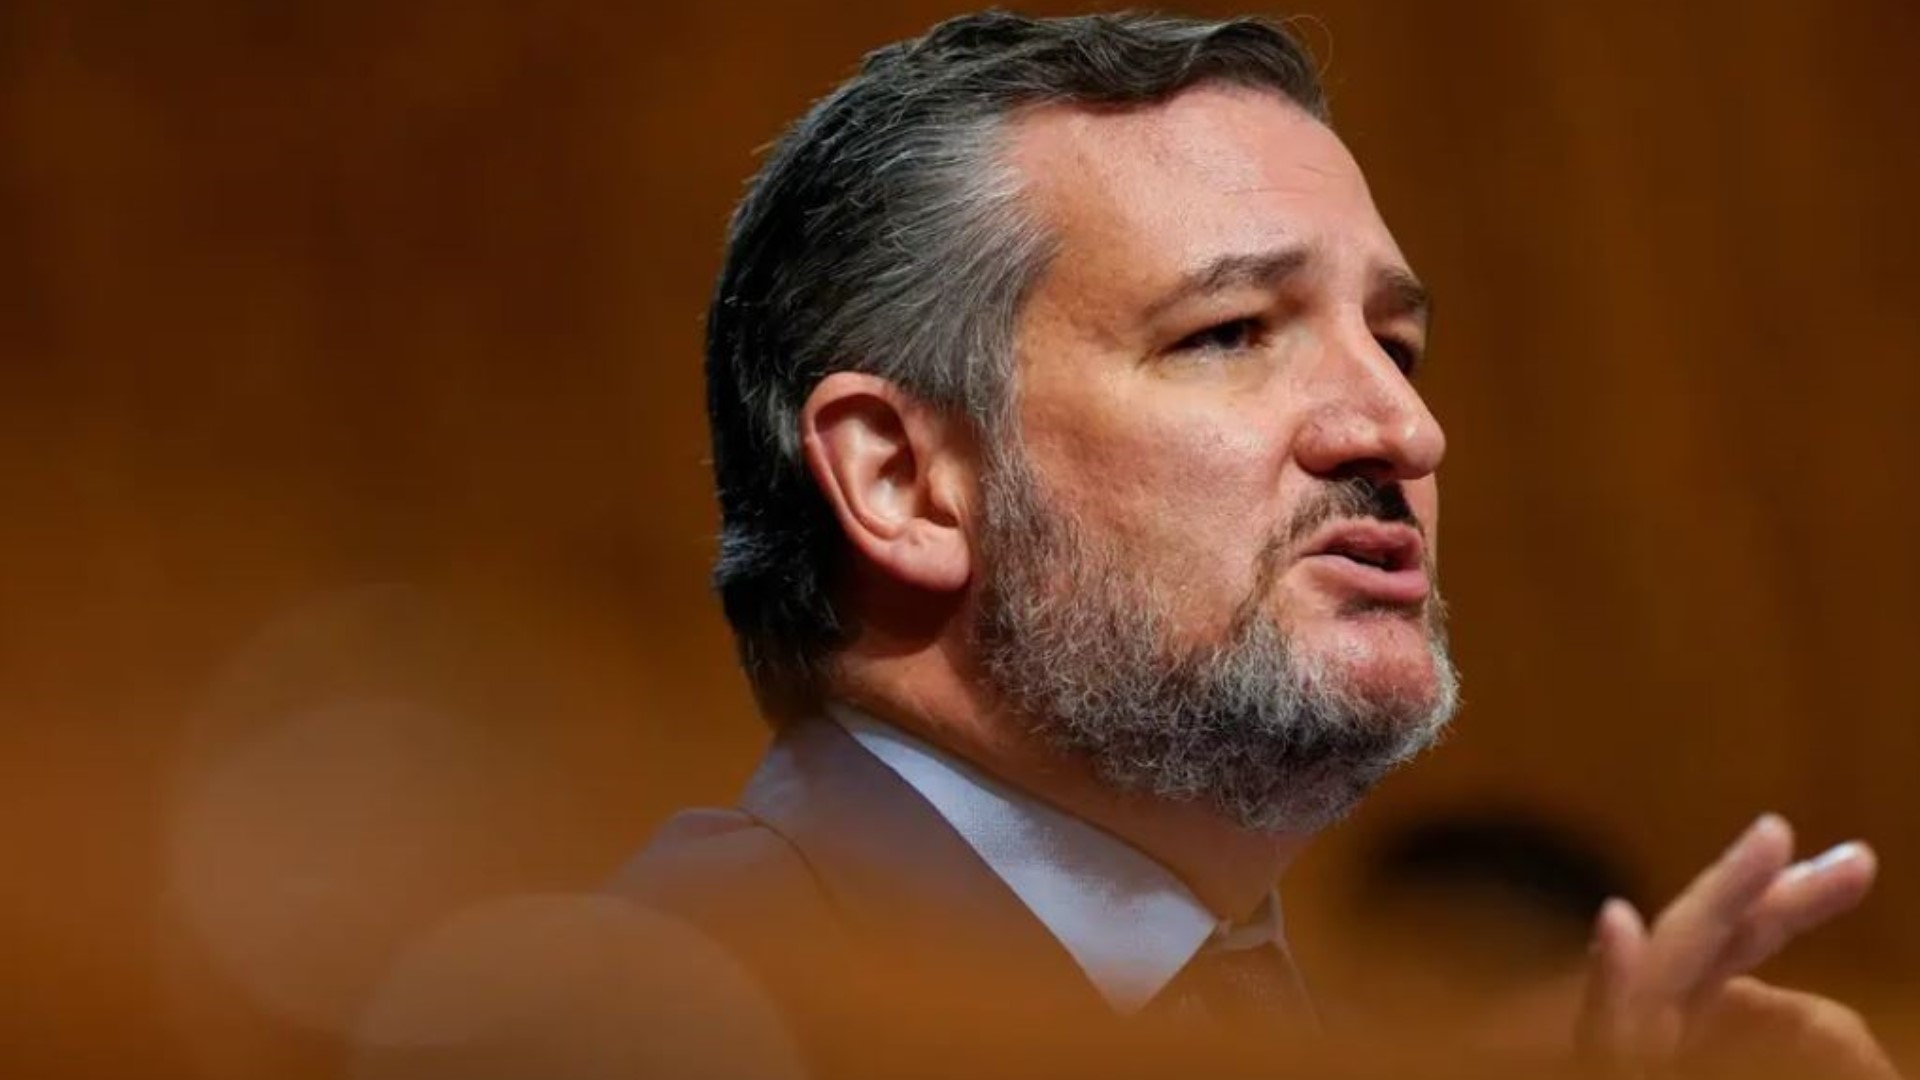 Houston police said they responded to Se. Ted Cruz's home in the River Oaks area on Tuesday night.